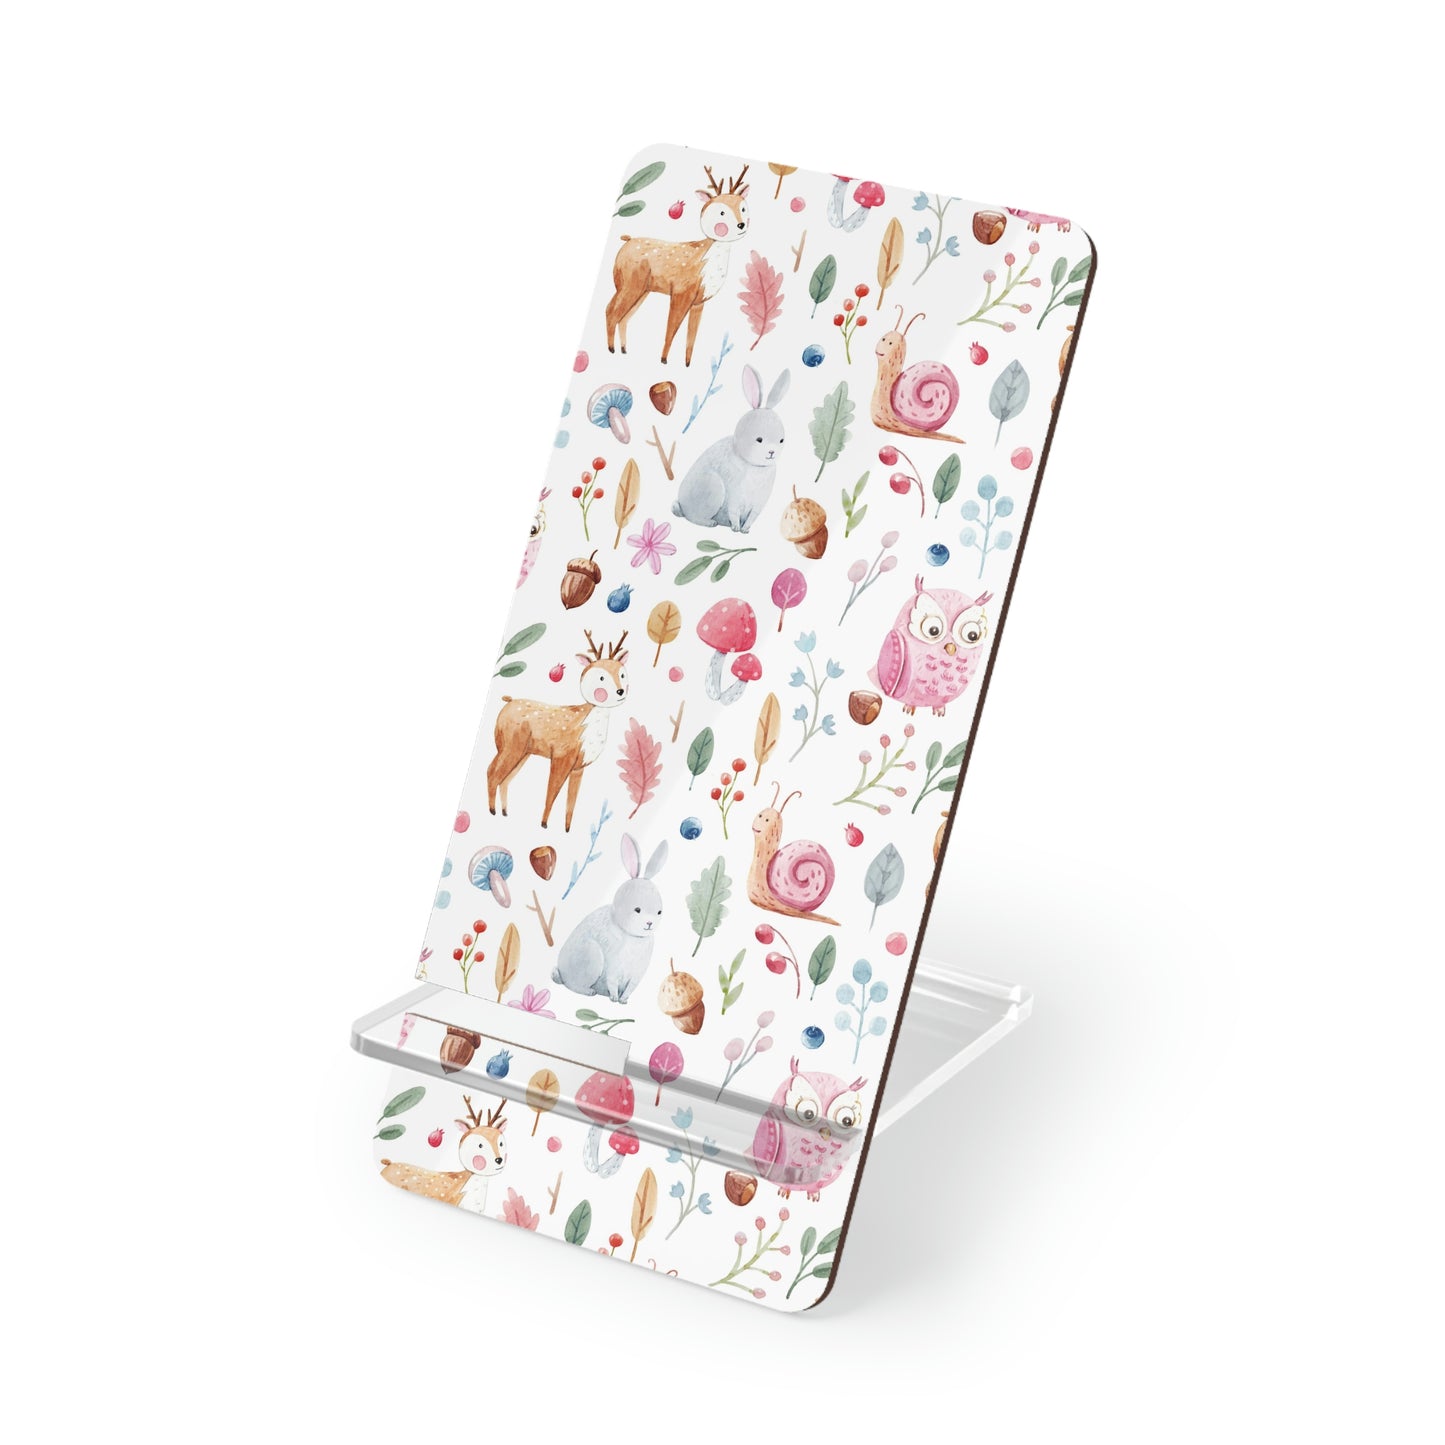 Fairy Forest Animals Mobile Display Stand for Smartphones